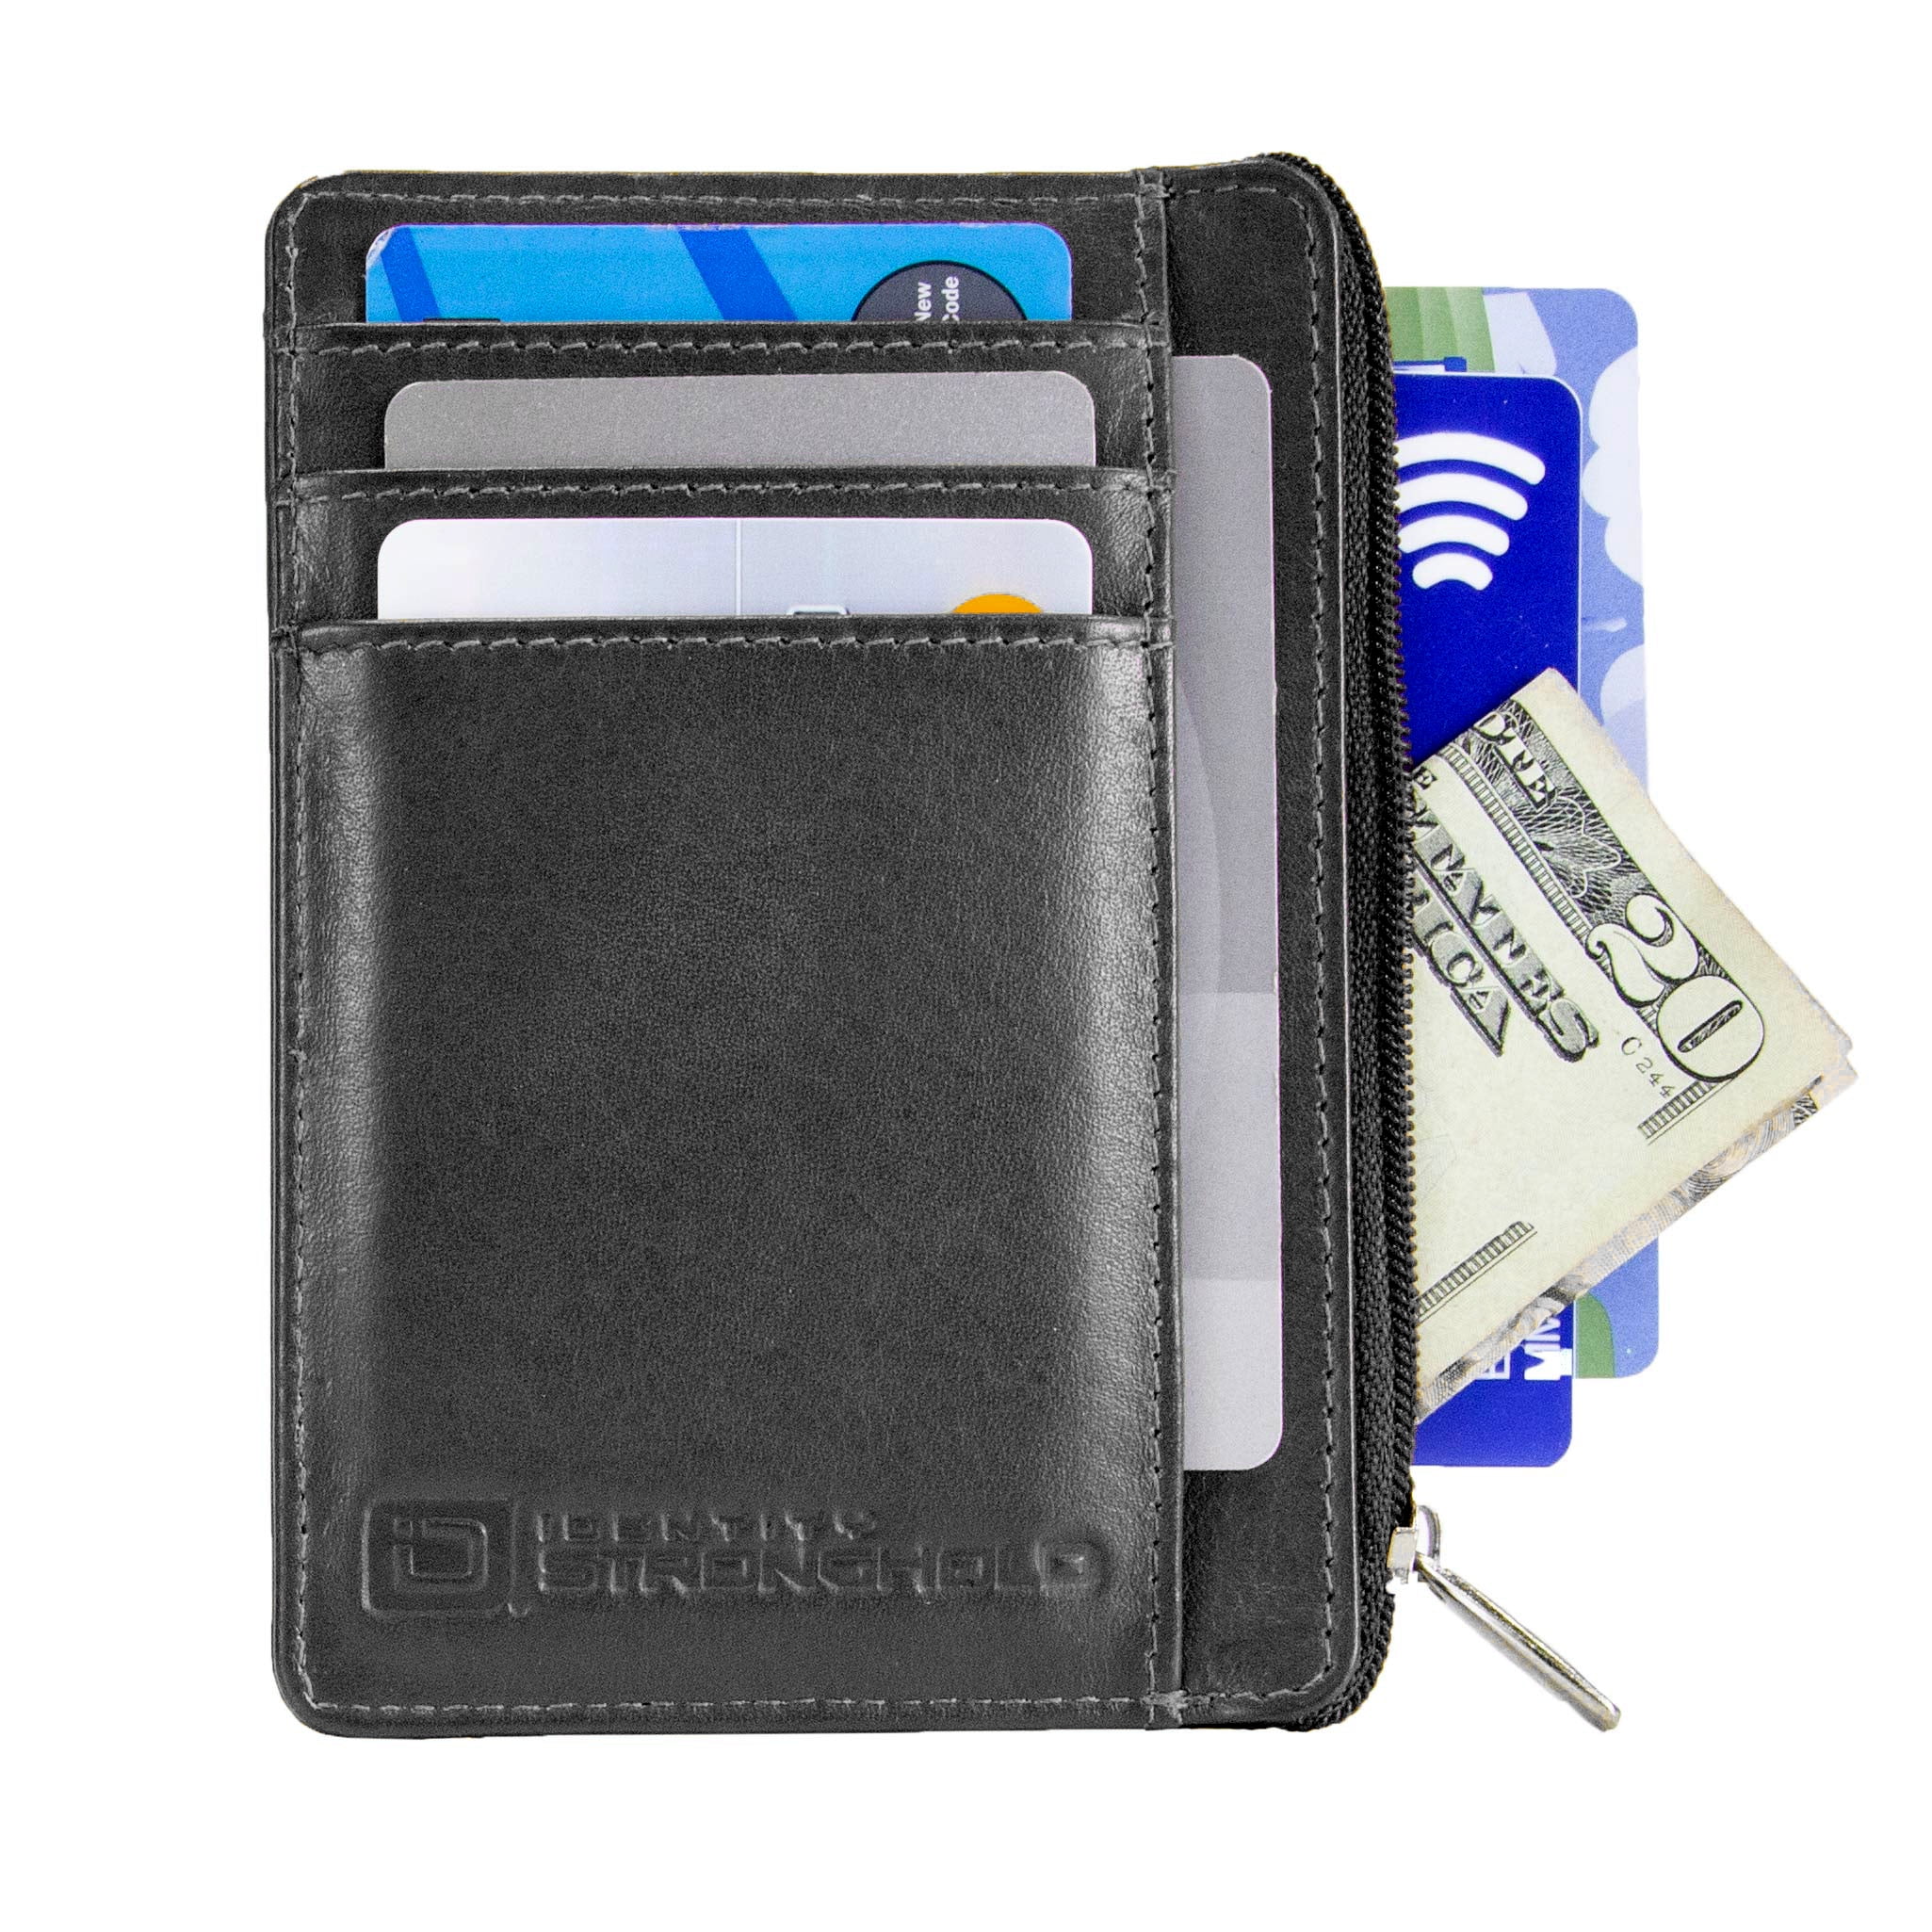 CREDIT CARD PICTURE HOLDER 32 PAGES WITH SNAP NEW BLACK GENUINE LEATHER 